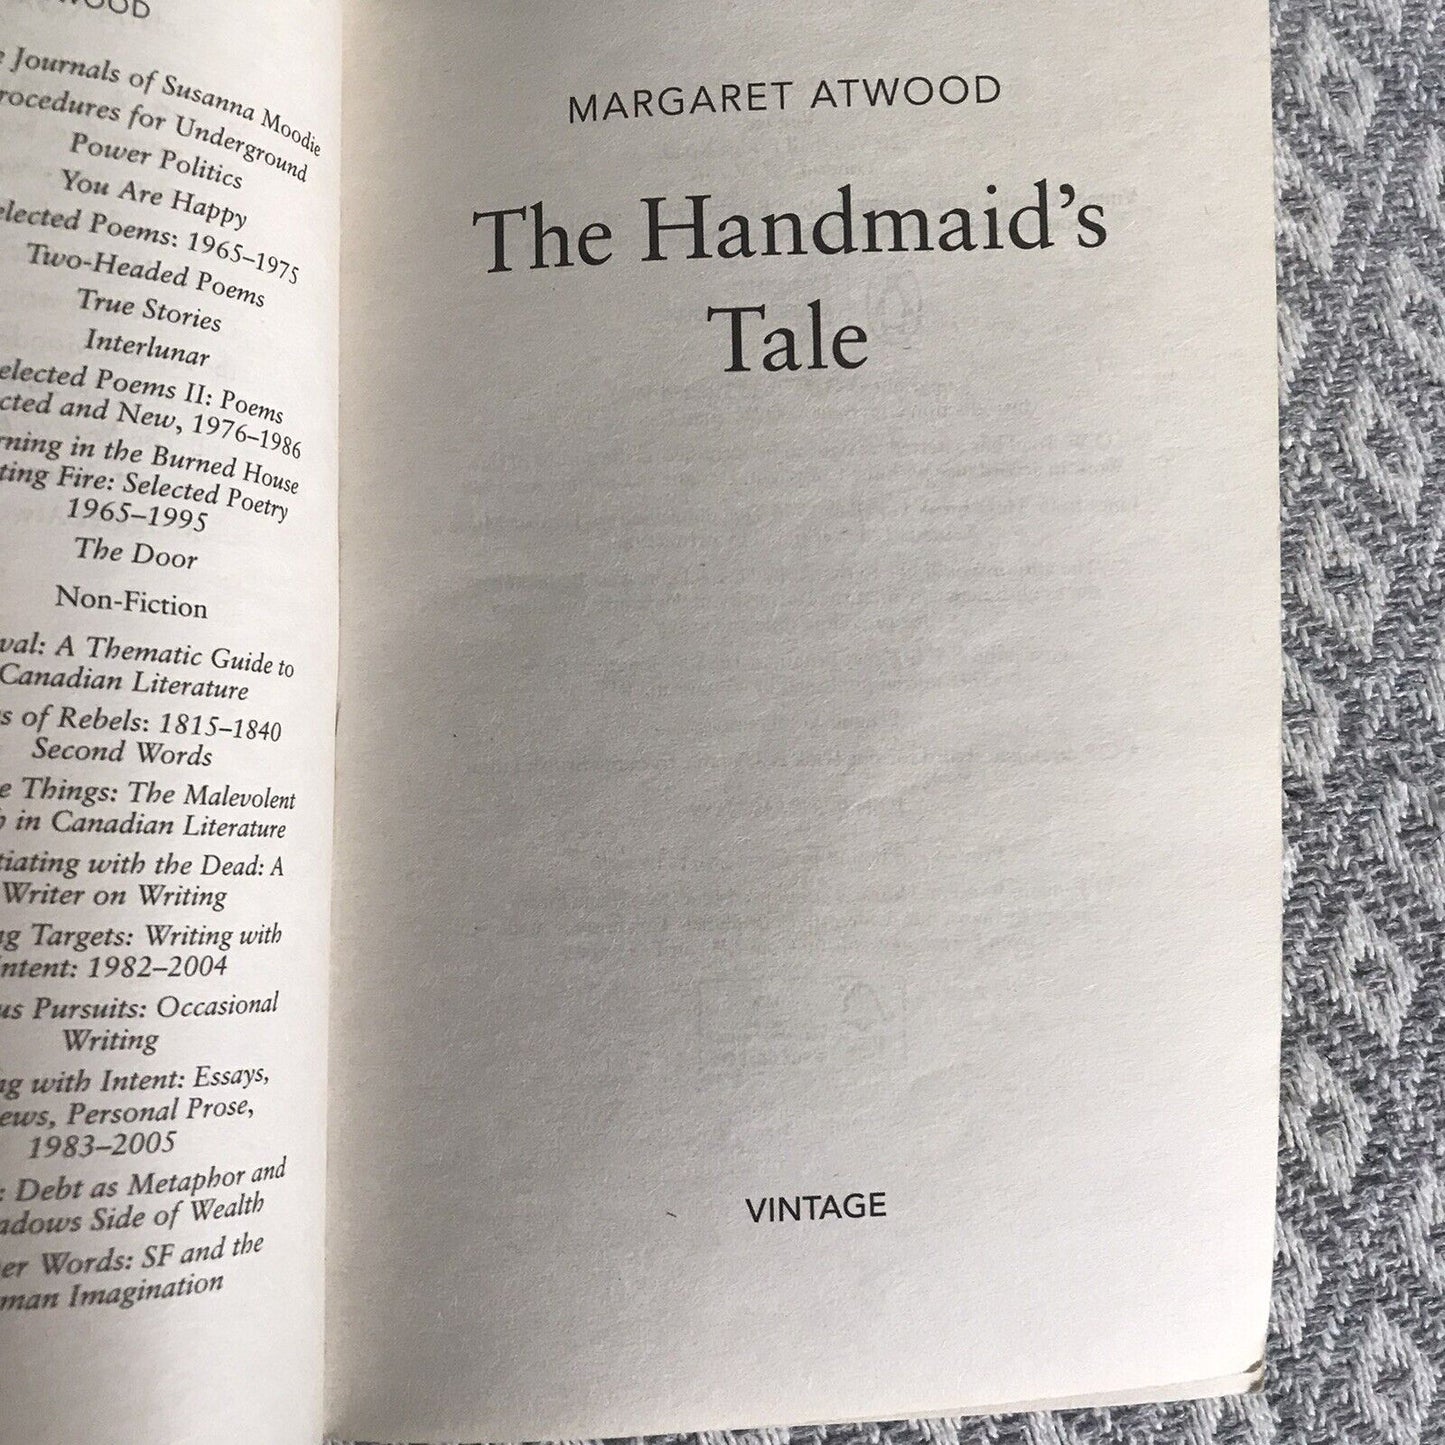 The Handmaid's Tale: the book that inspired the hit TV series by Margaret Atwood